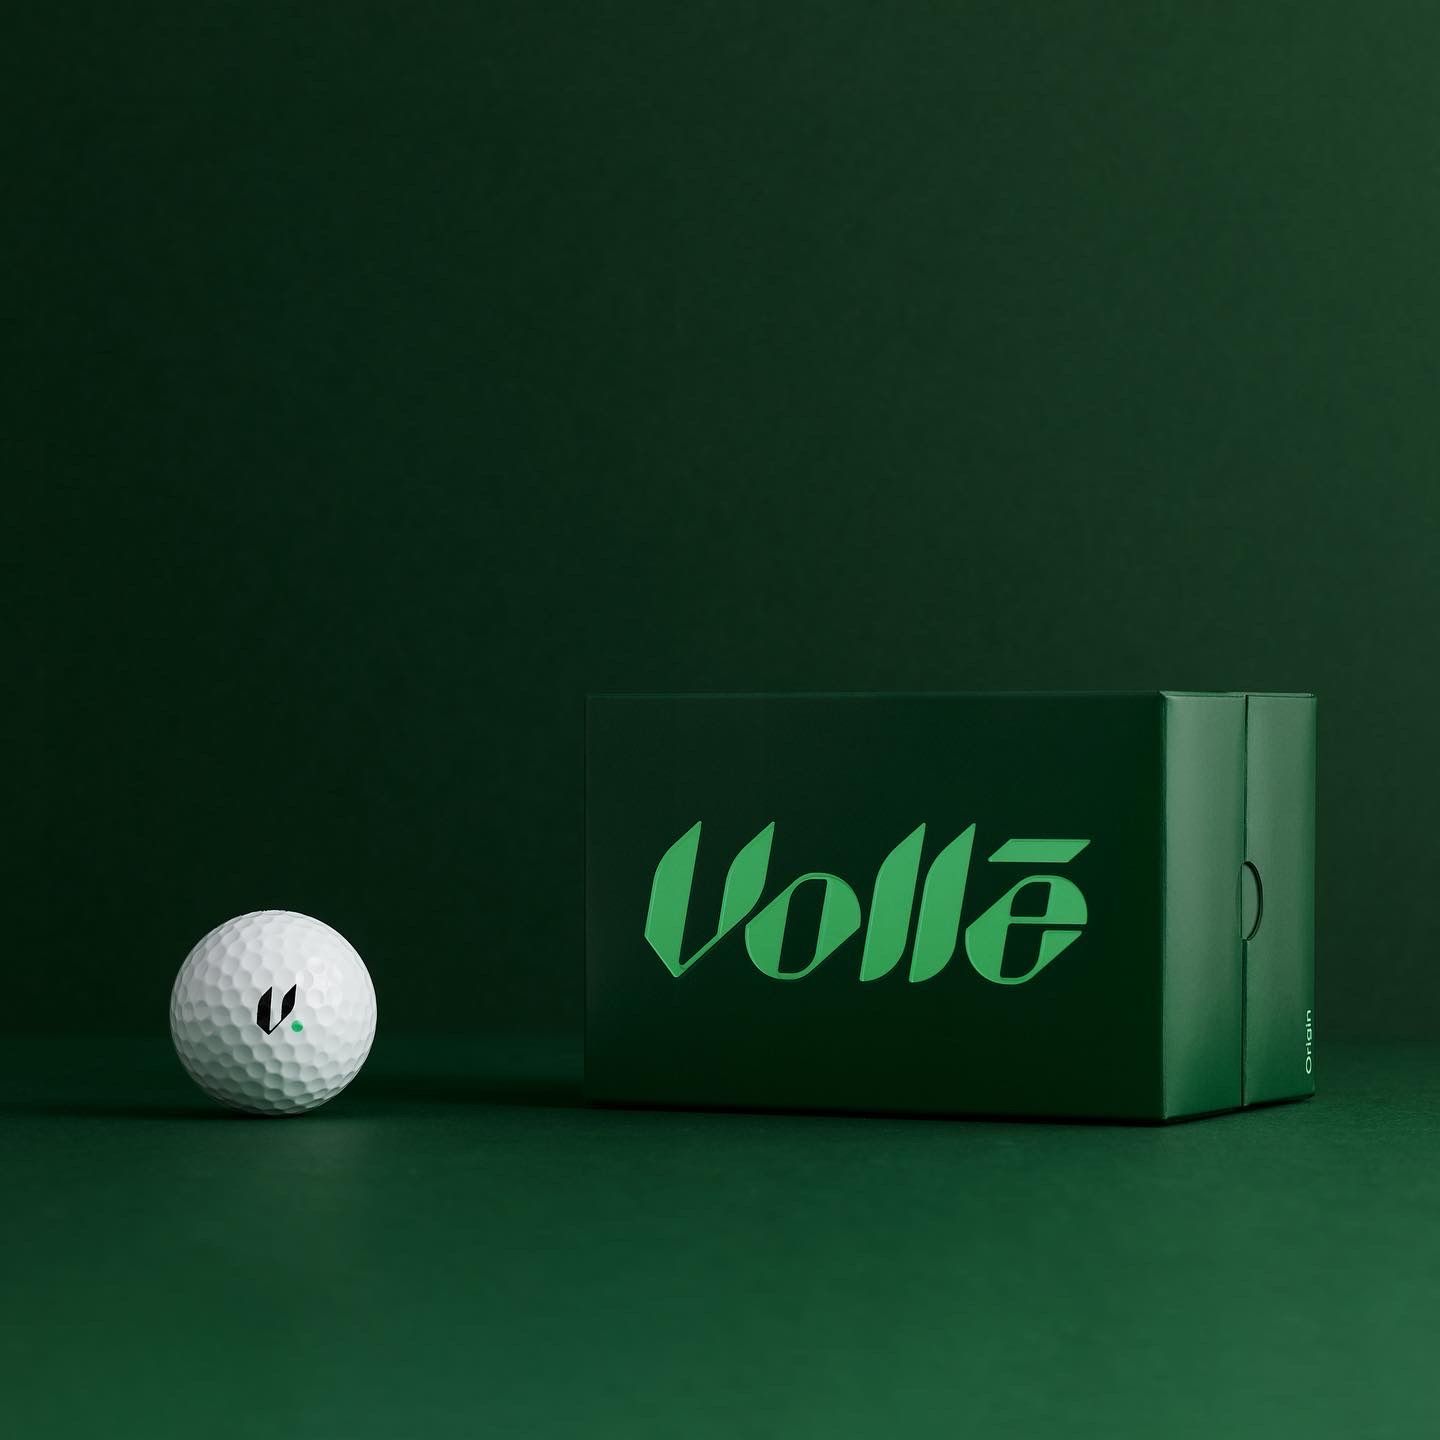 Volle Golf Is New Zealand's First Direct Consumer Golf | Dieline - Design, Branding & Packaging Inspiration